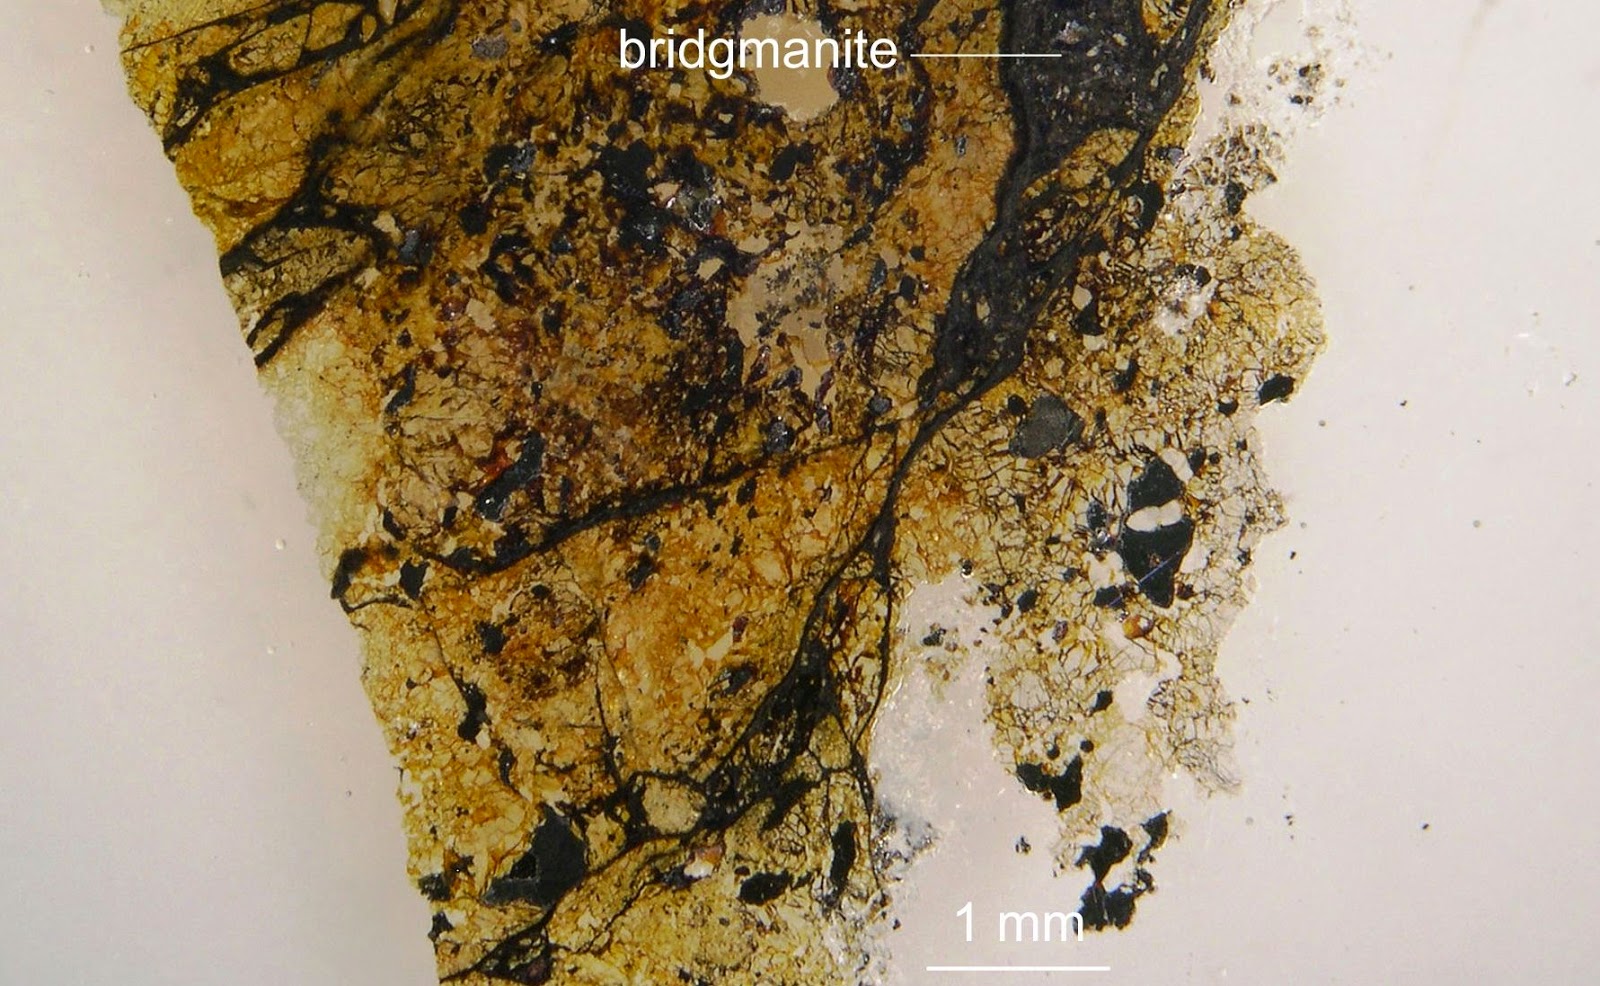 http://article.wn.com/view/2014/06/18/Earths_Most_Abundant_Mineral_Bridgmanite_Finally_Shows_Its_F/